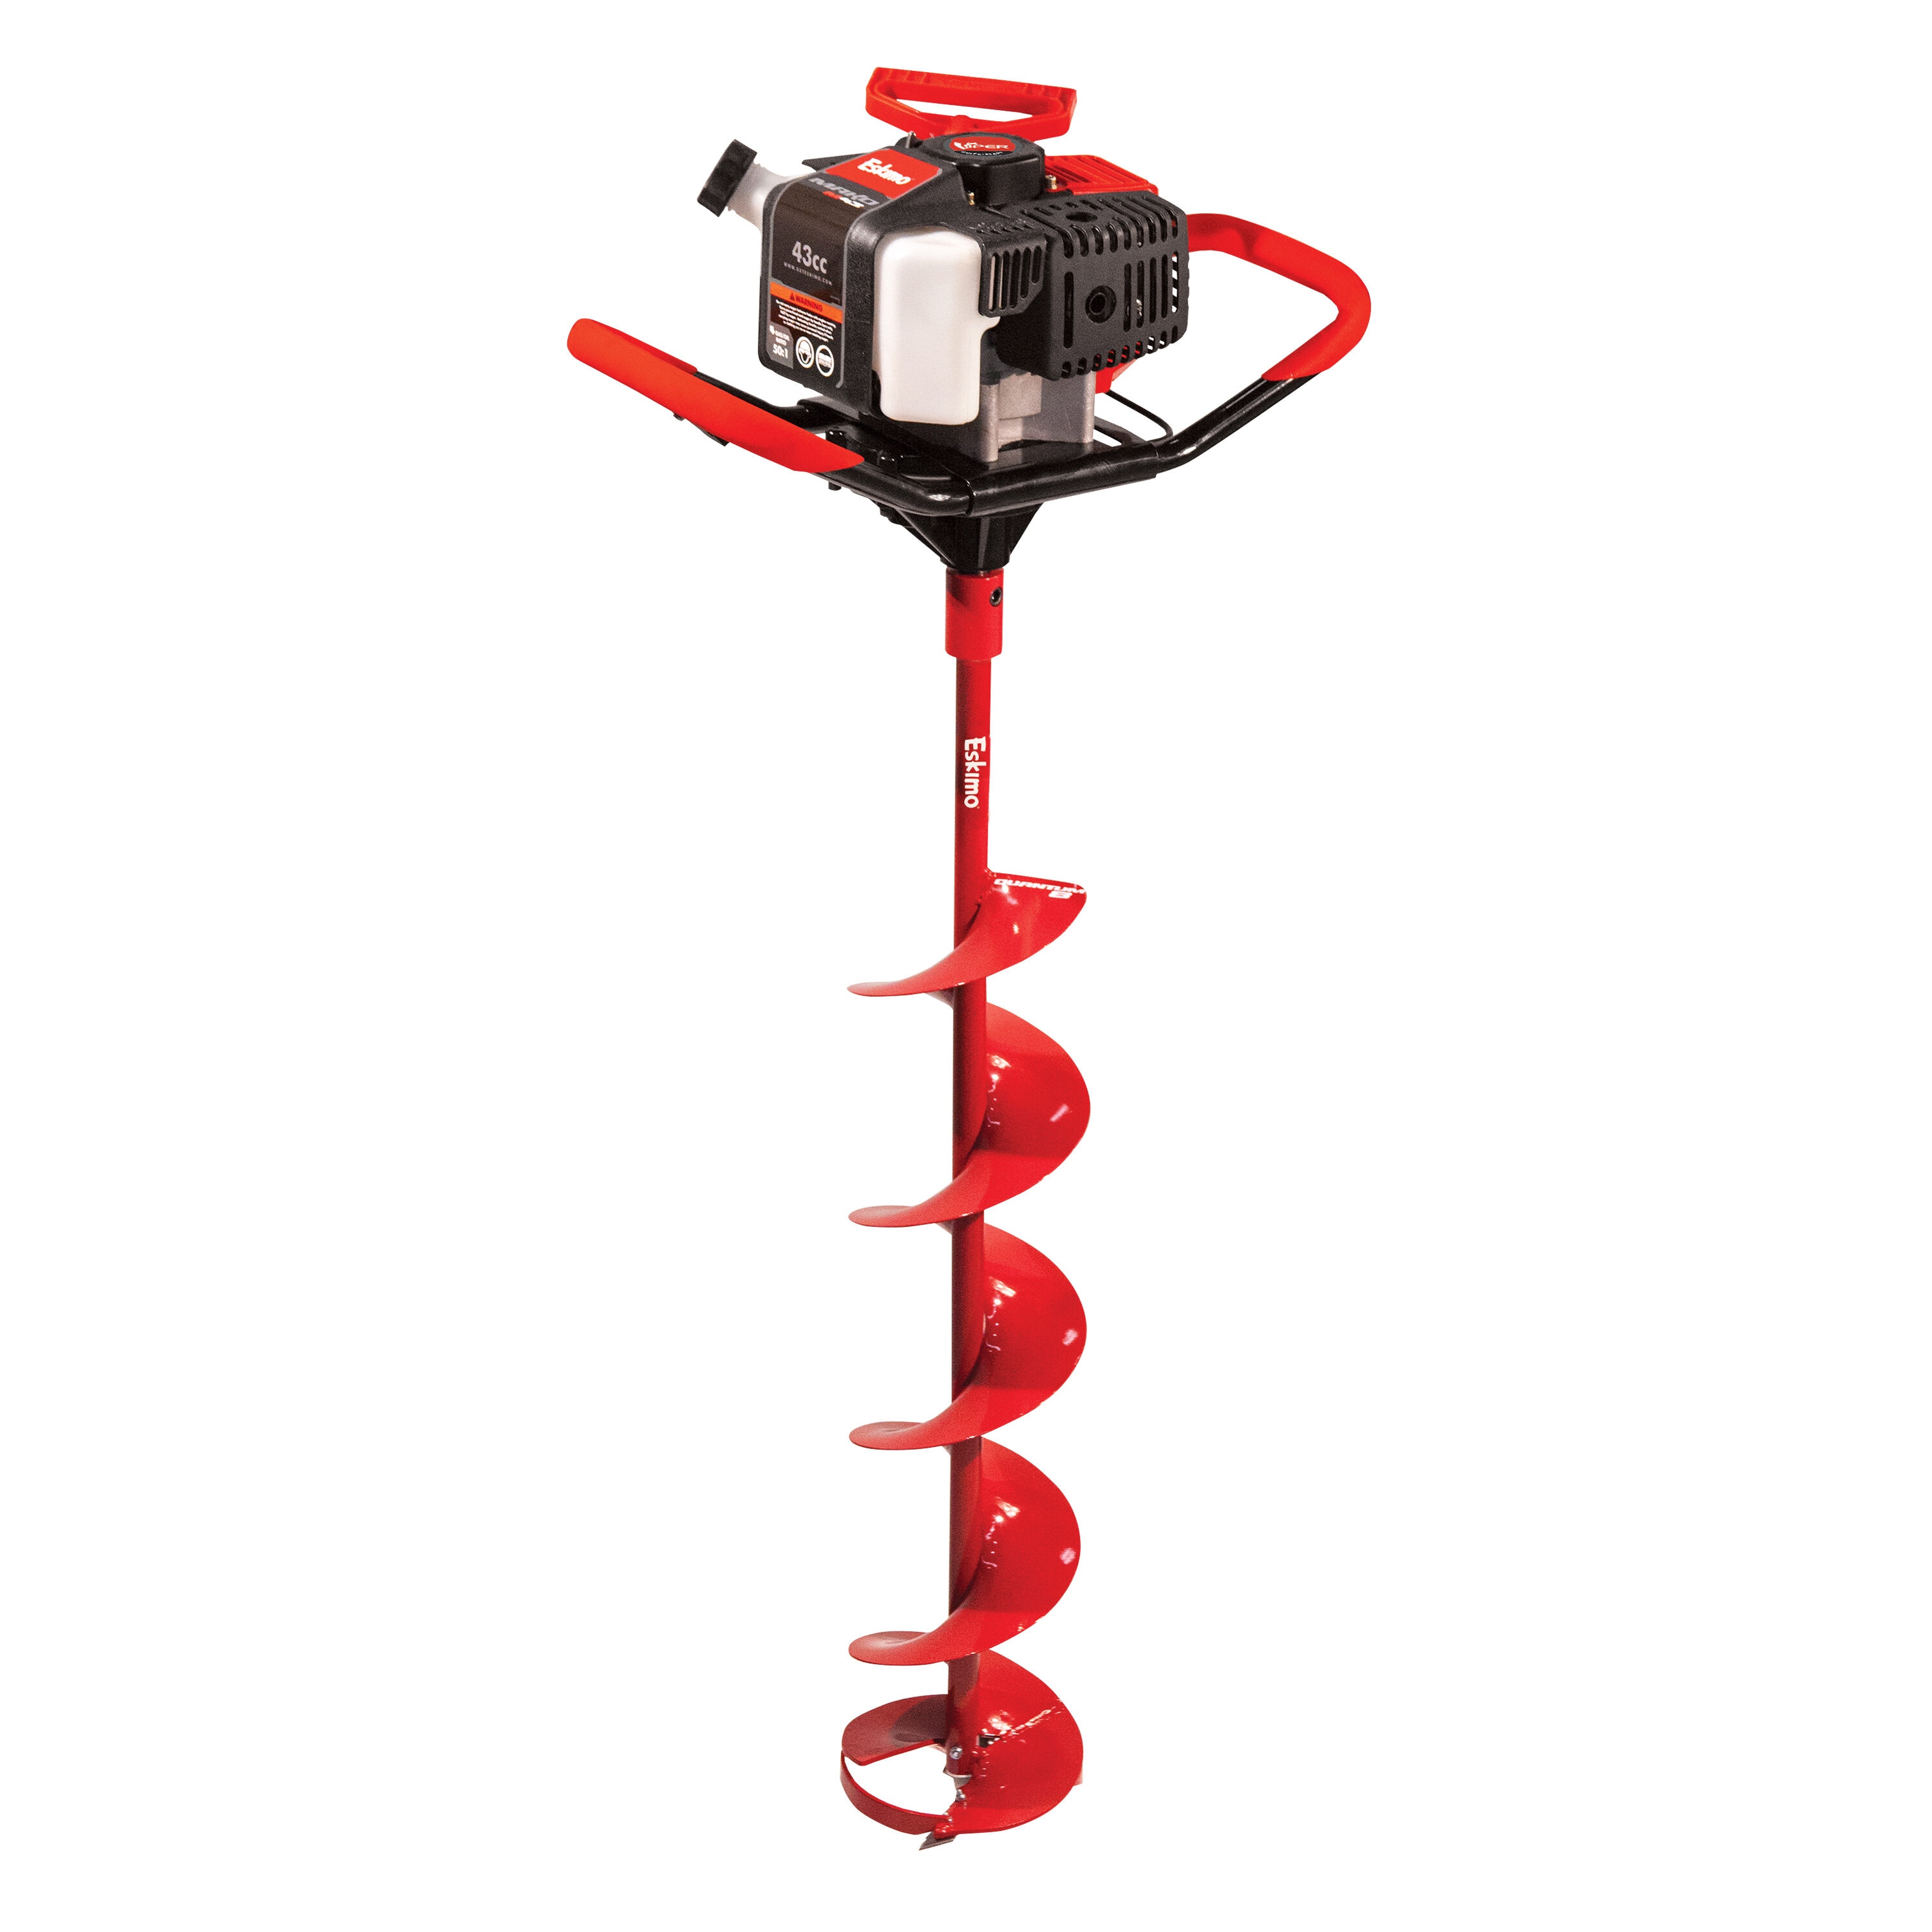 43cc Gas Powered Ice Fishing Auger, 8-inch Outdoor Tools & Equipment at